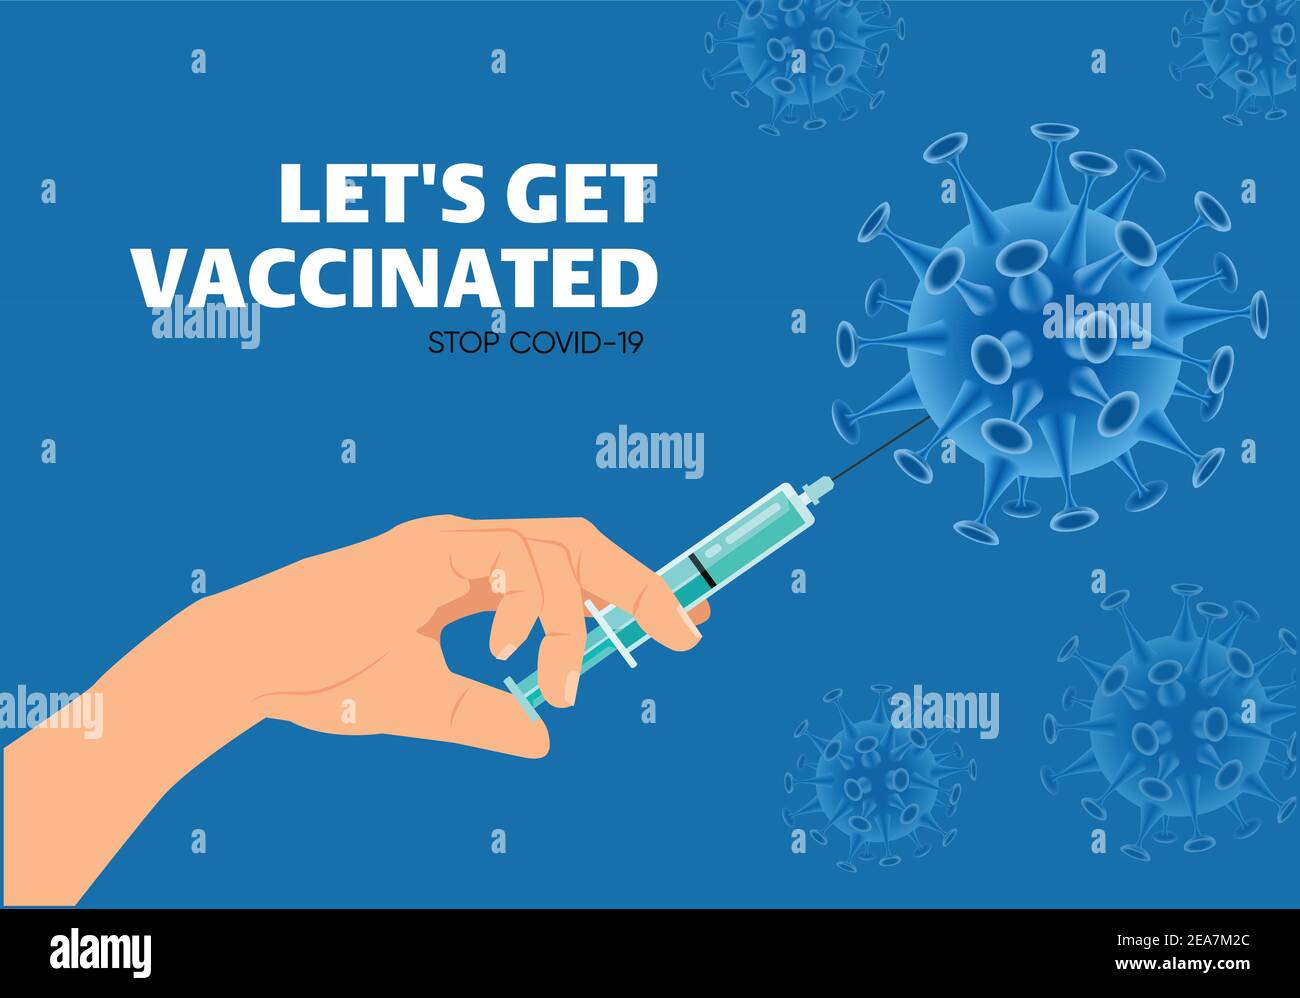 Covid-19 Vacctination Poster. Doctor`s hand holding syringe with vaccine. Vector illustration. Let's get vaccinated. Let's Stop Covid-19. Promotion. E Stock Vector